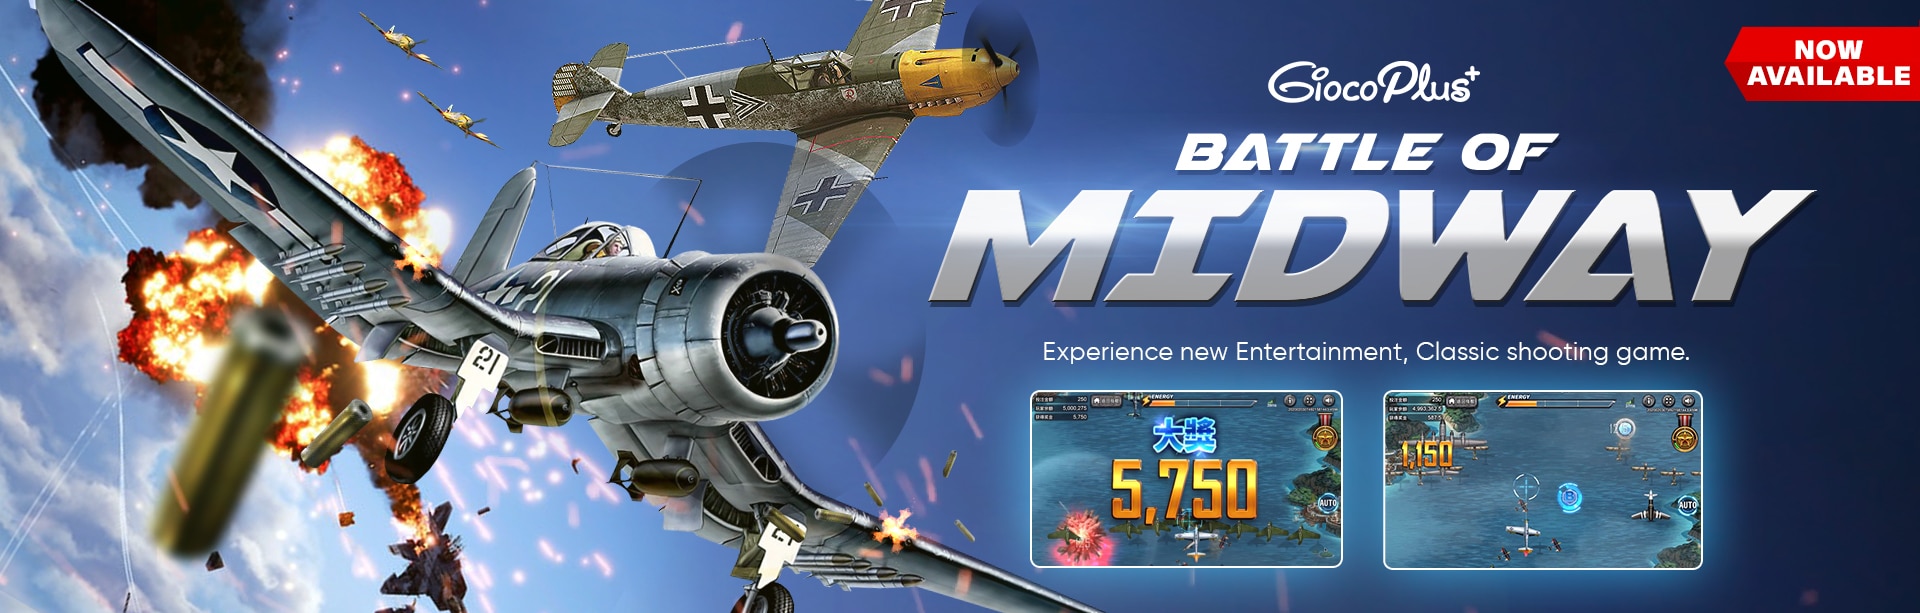 Battle Of Midway Gioco Plus เกม Slot369